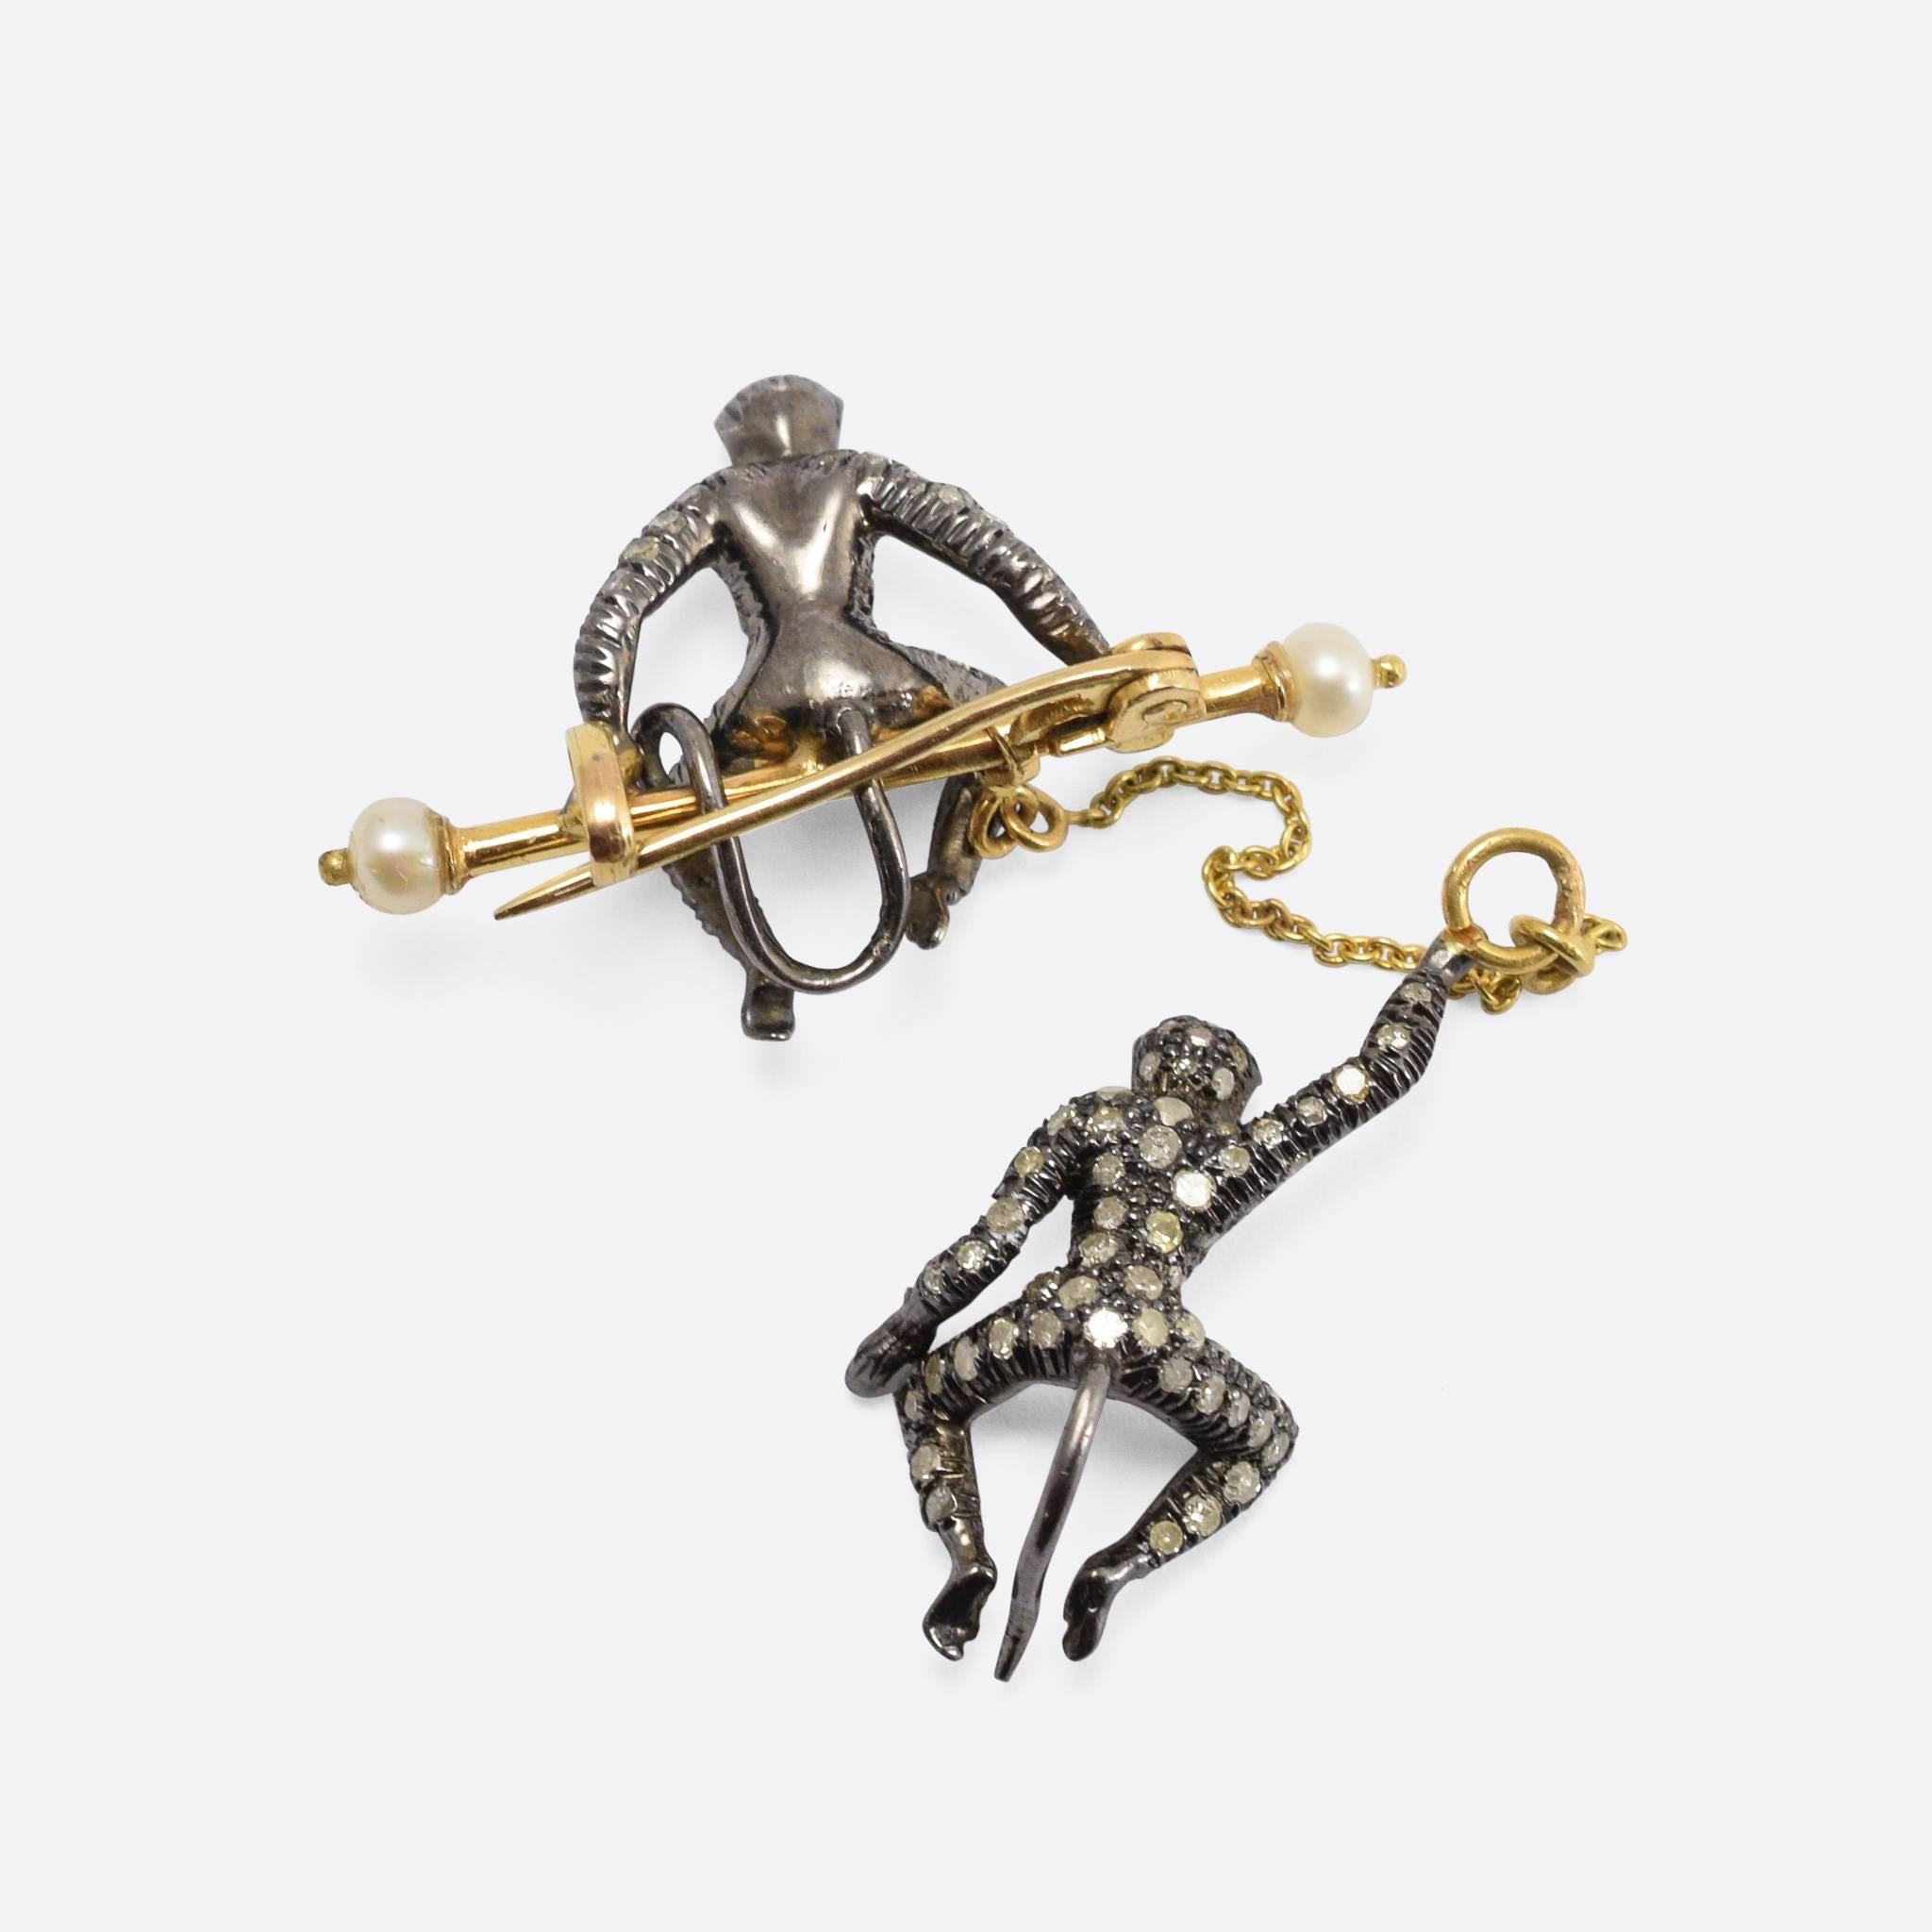 A cool 1960s novelty brooch: two diamond studded monkeys, the top one is sitting on a gold bar (with pearl ends), while the bottom monkey swings from a chain. They have rubies for eyes, and the diamonds continue around their backs too - unusual for